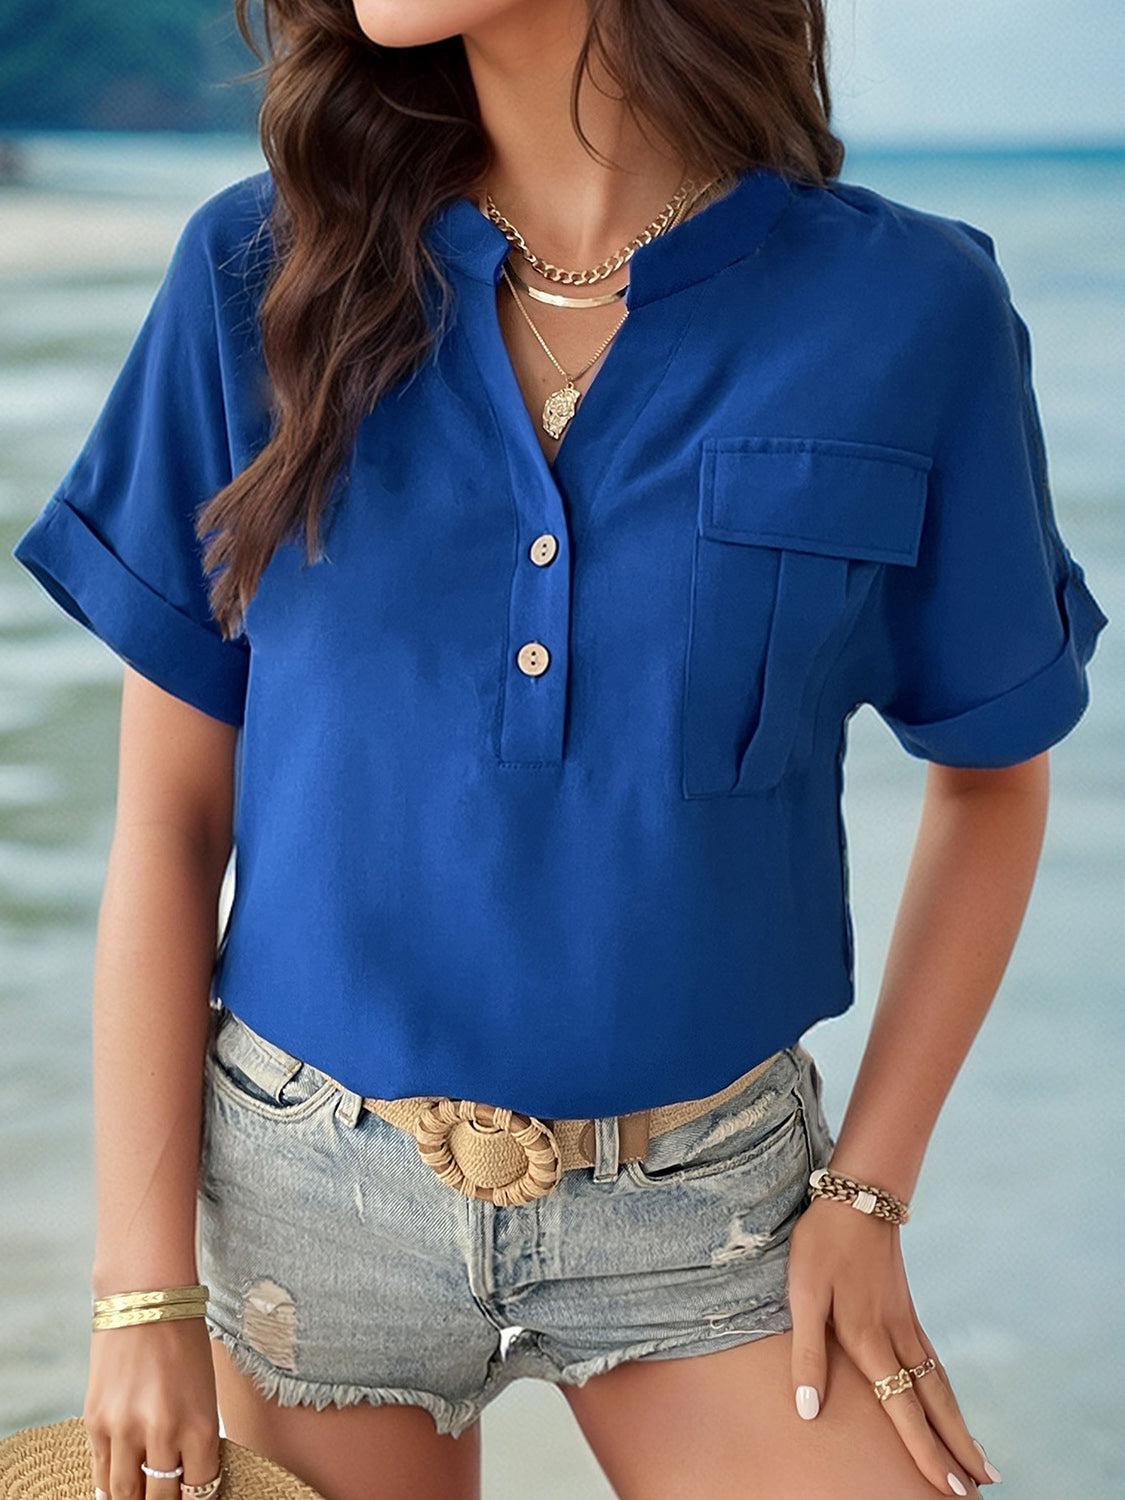 a woman wearing a blue shirt and shorts